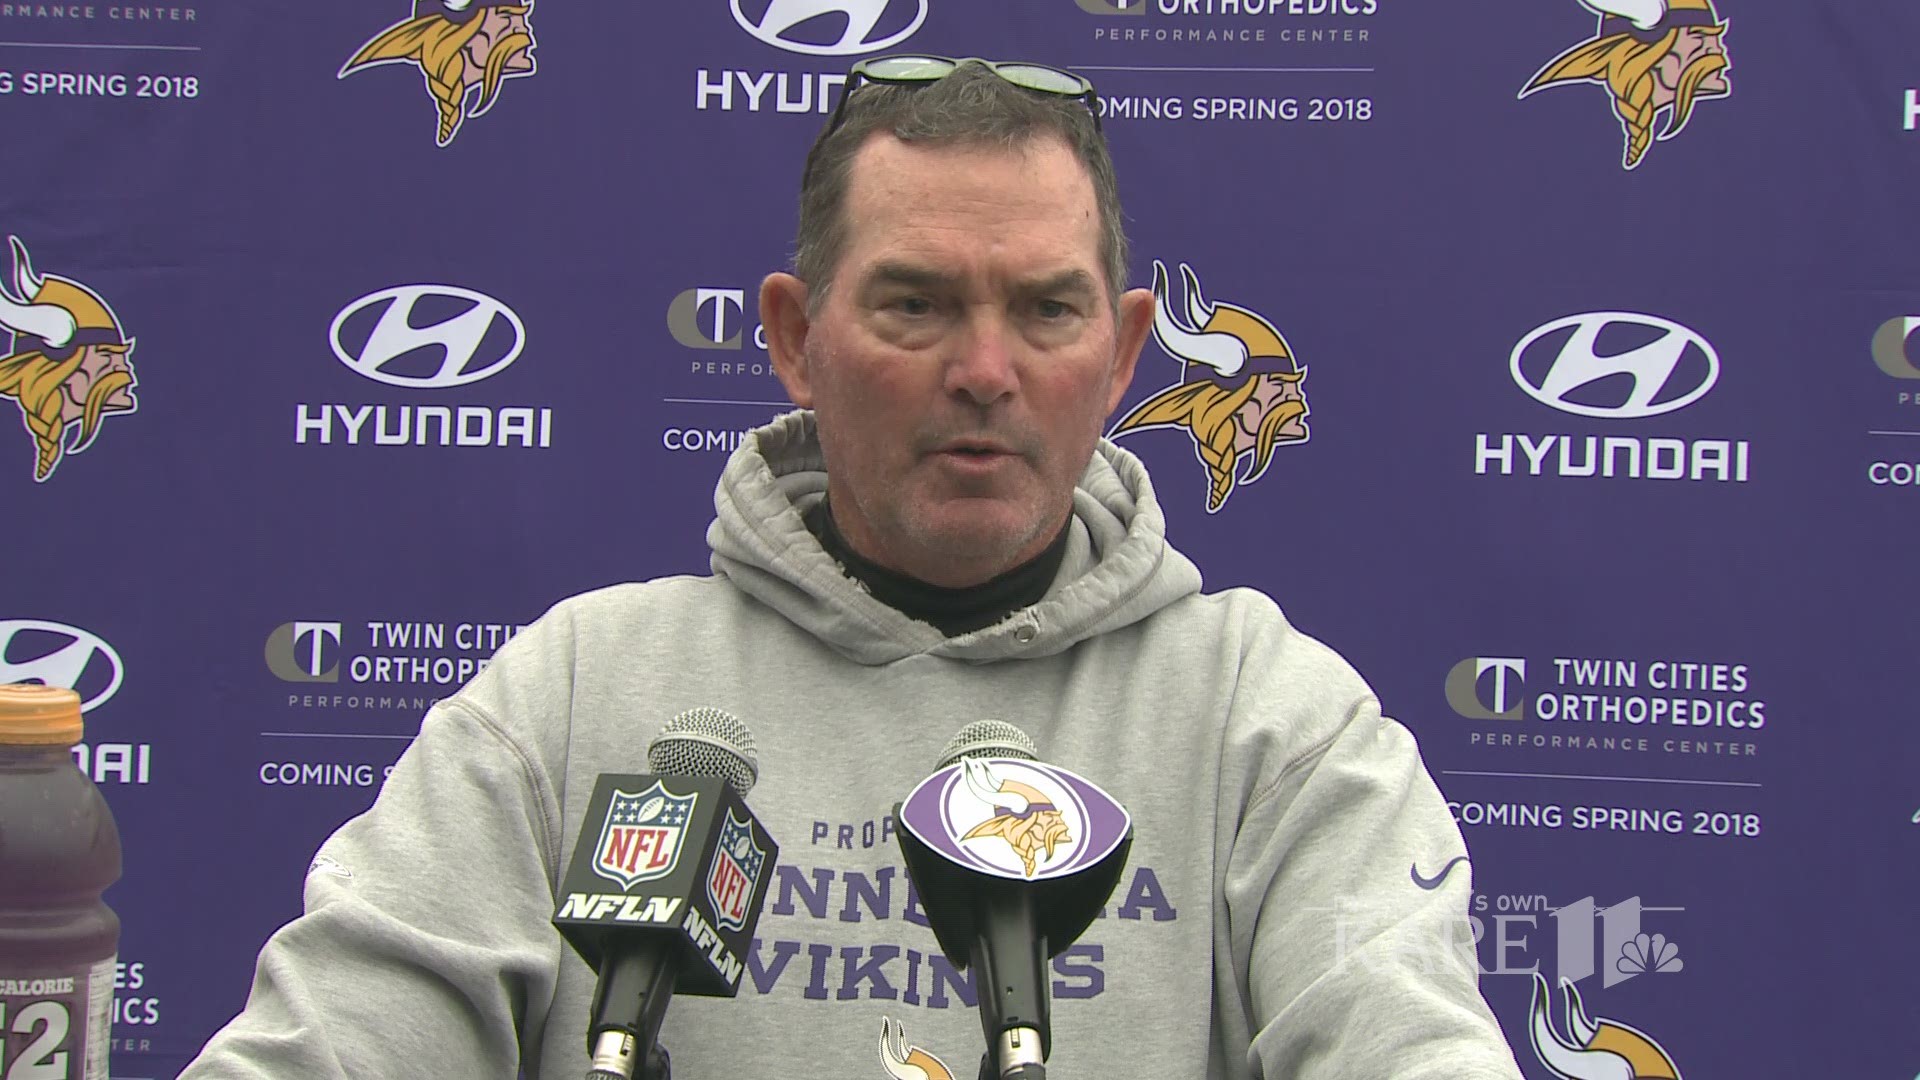 Coach Zimmer and Vikings players react to the news Monday morning that rookie RB Dalvin Cook tore his ACL in Sunday's game vs Detriot.